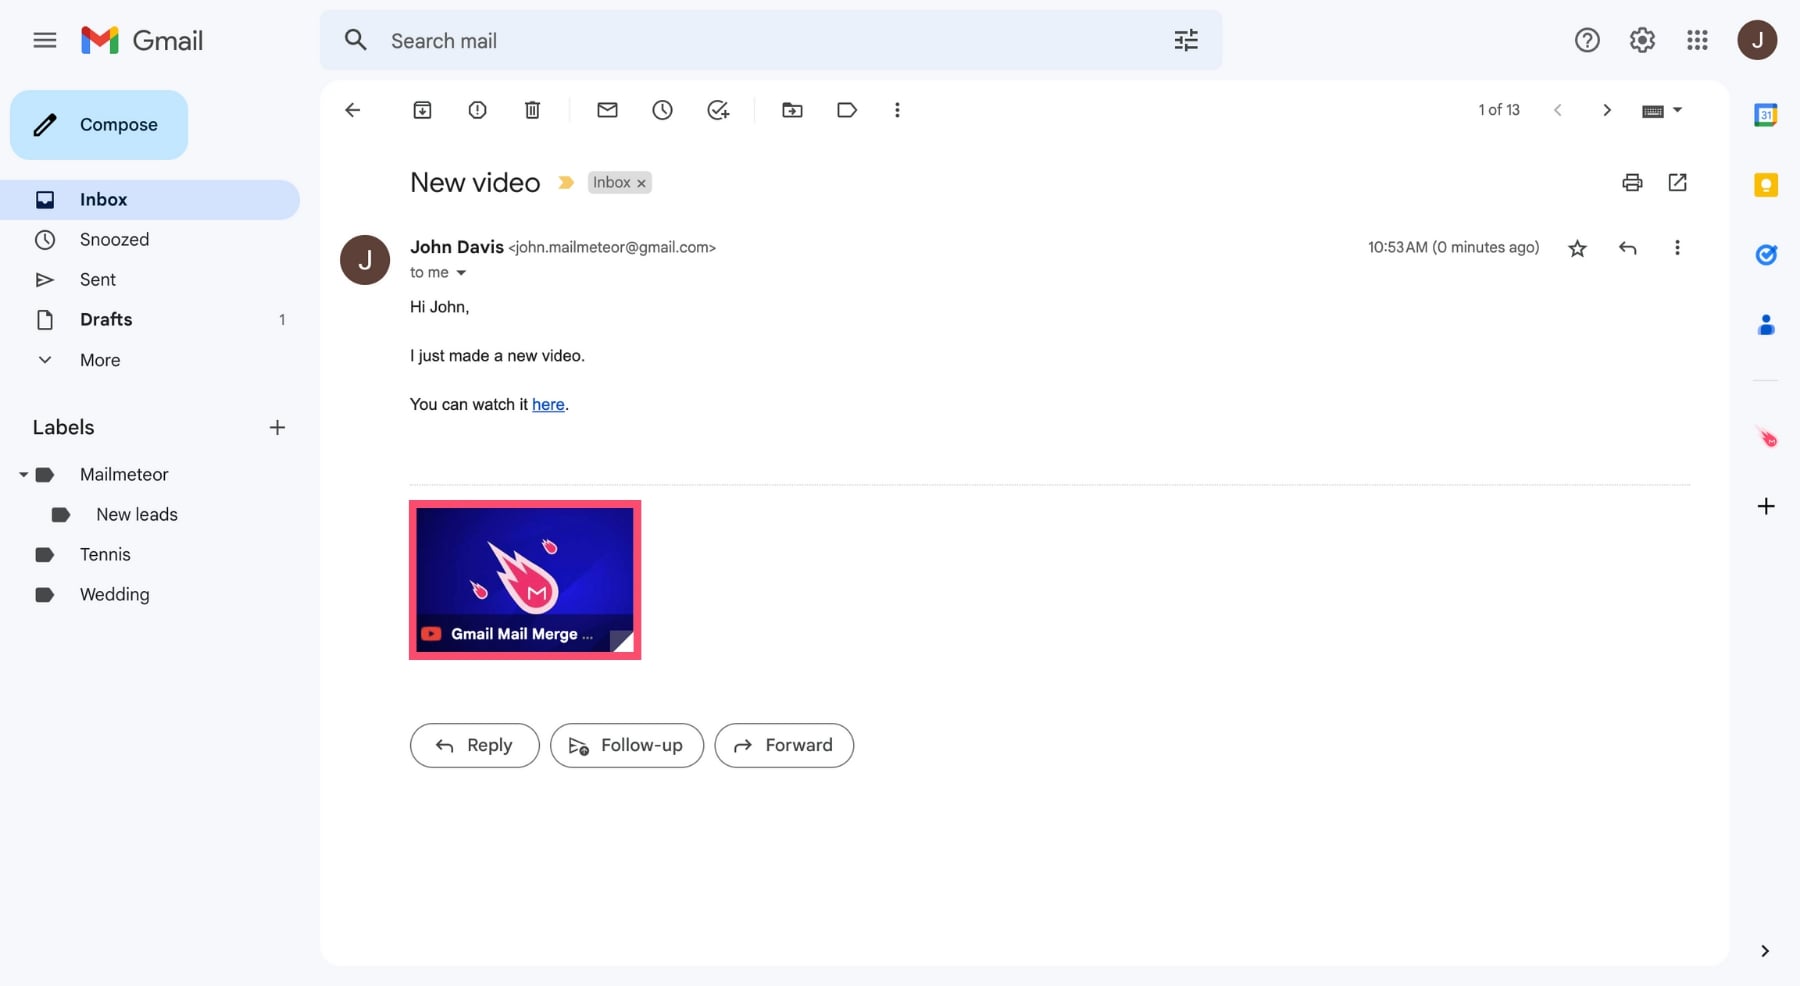 Embedded video in Gmail